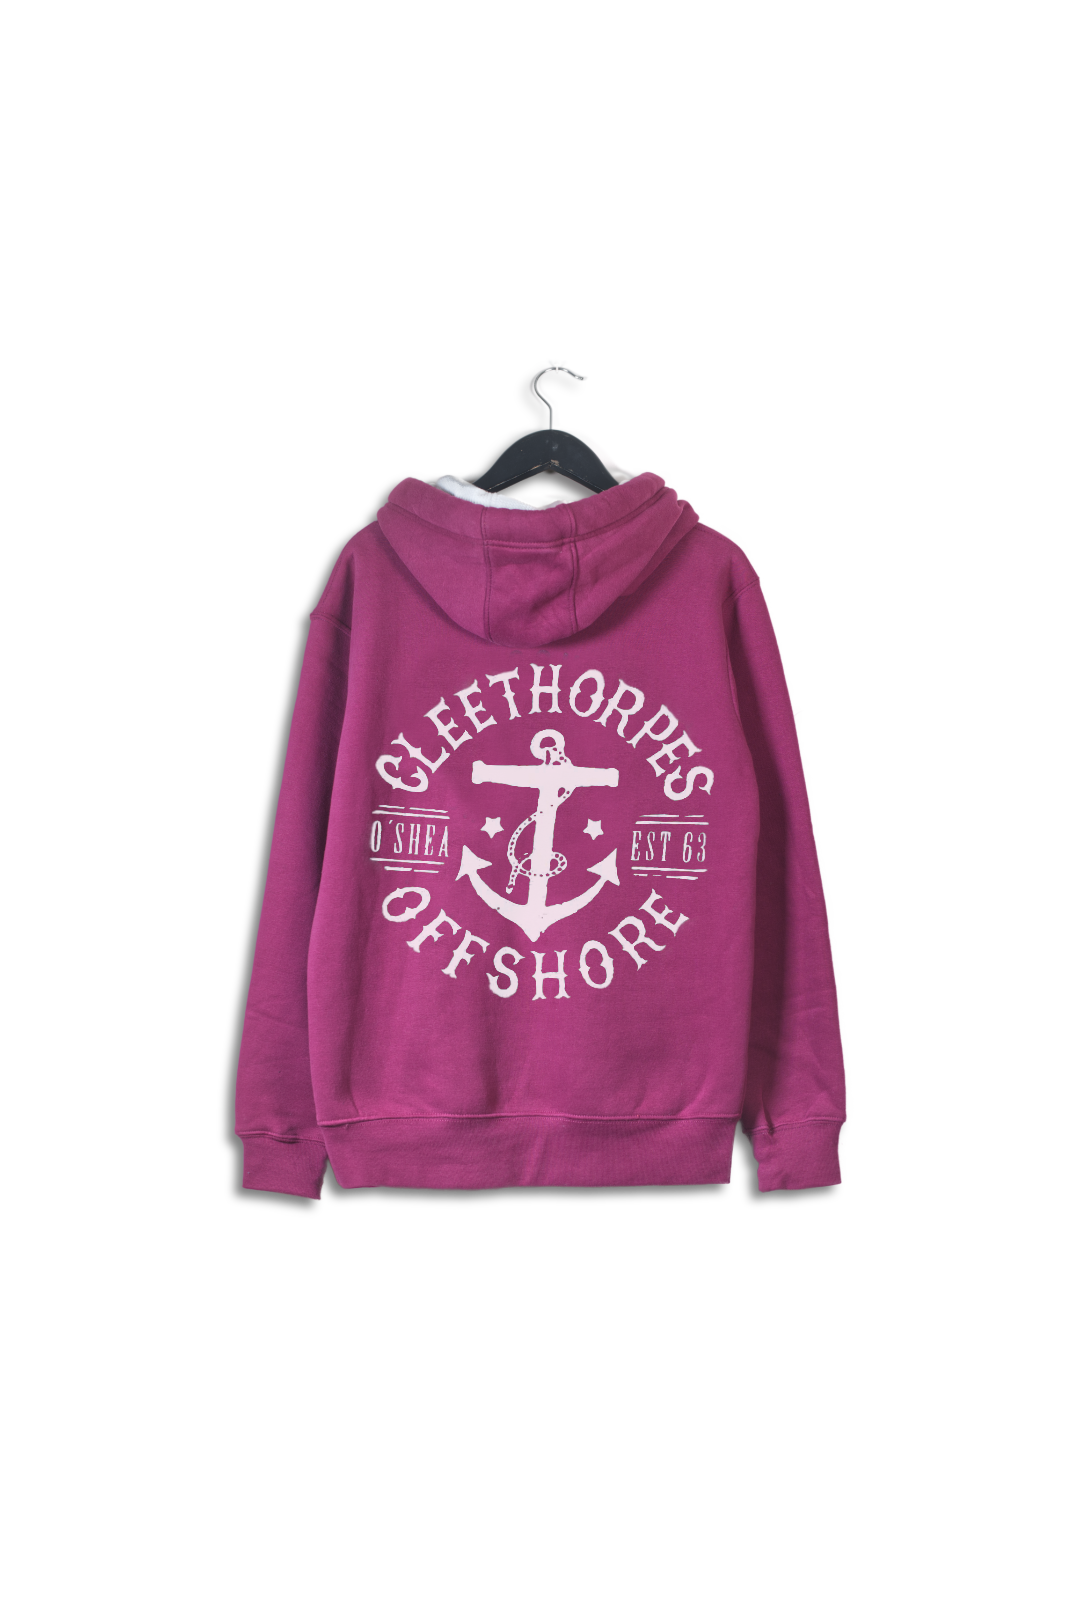 CLEETHORPES OFFSHORE ZIPPED BERRY